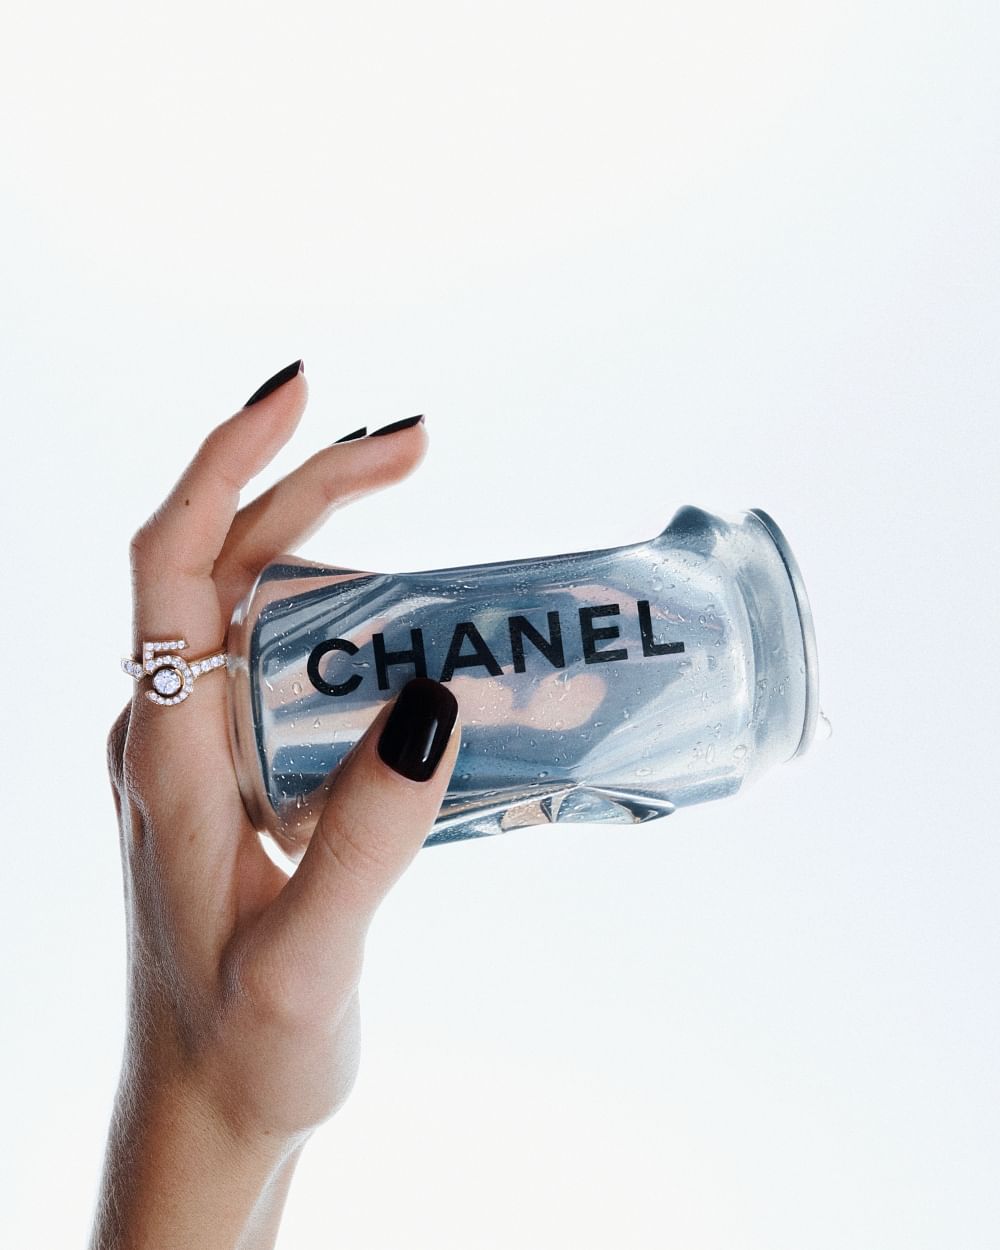 Discover Chanel's new No5 jewels inspired by the perfume.